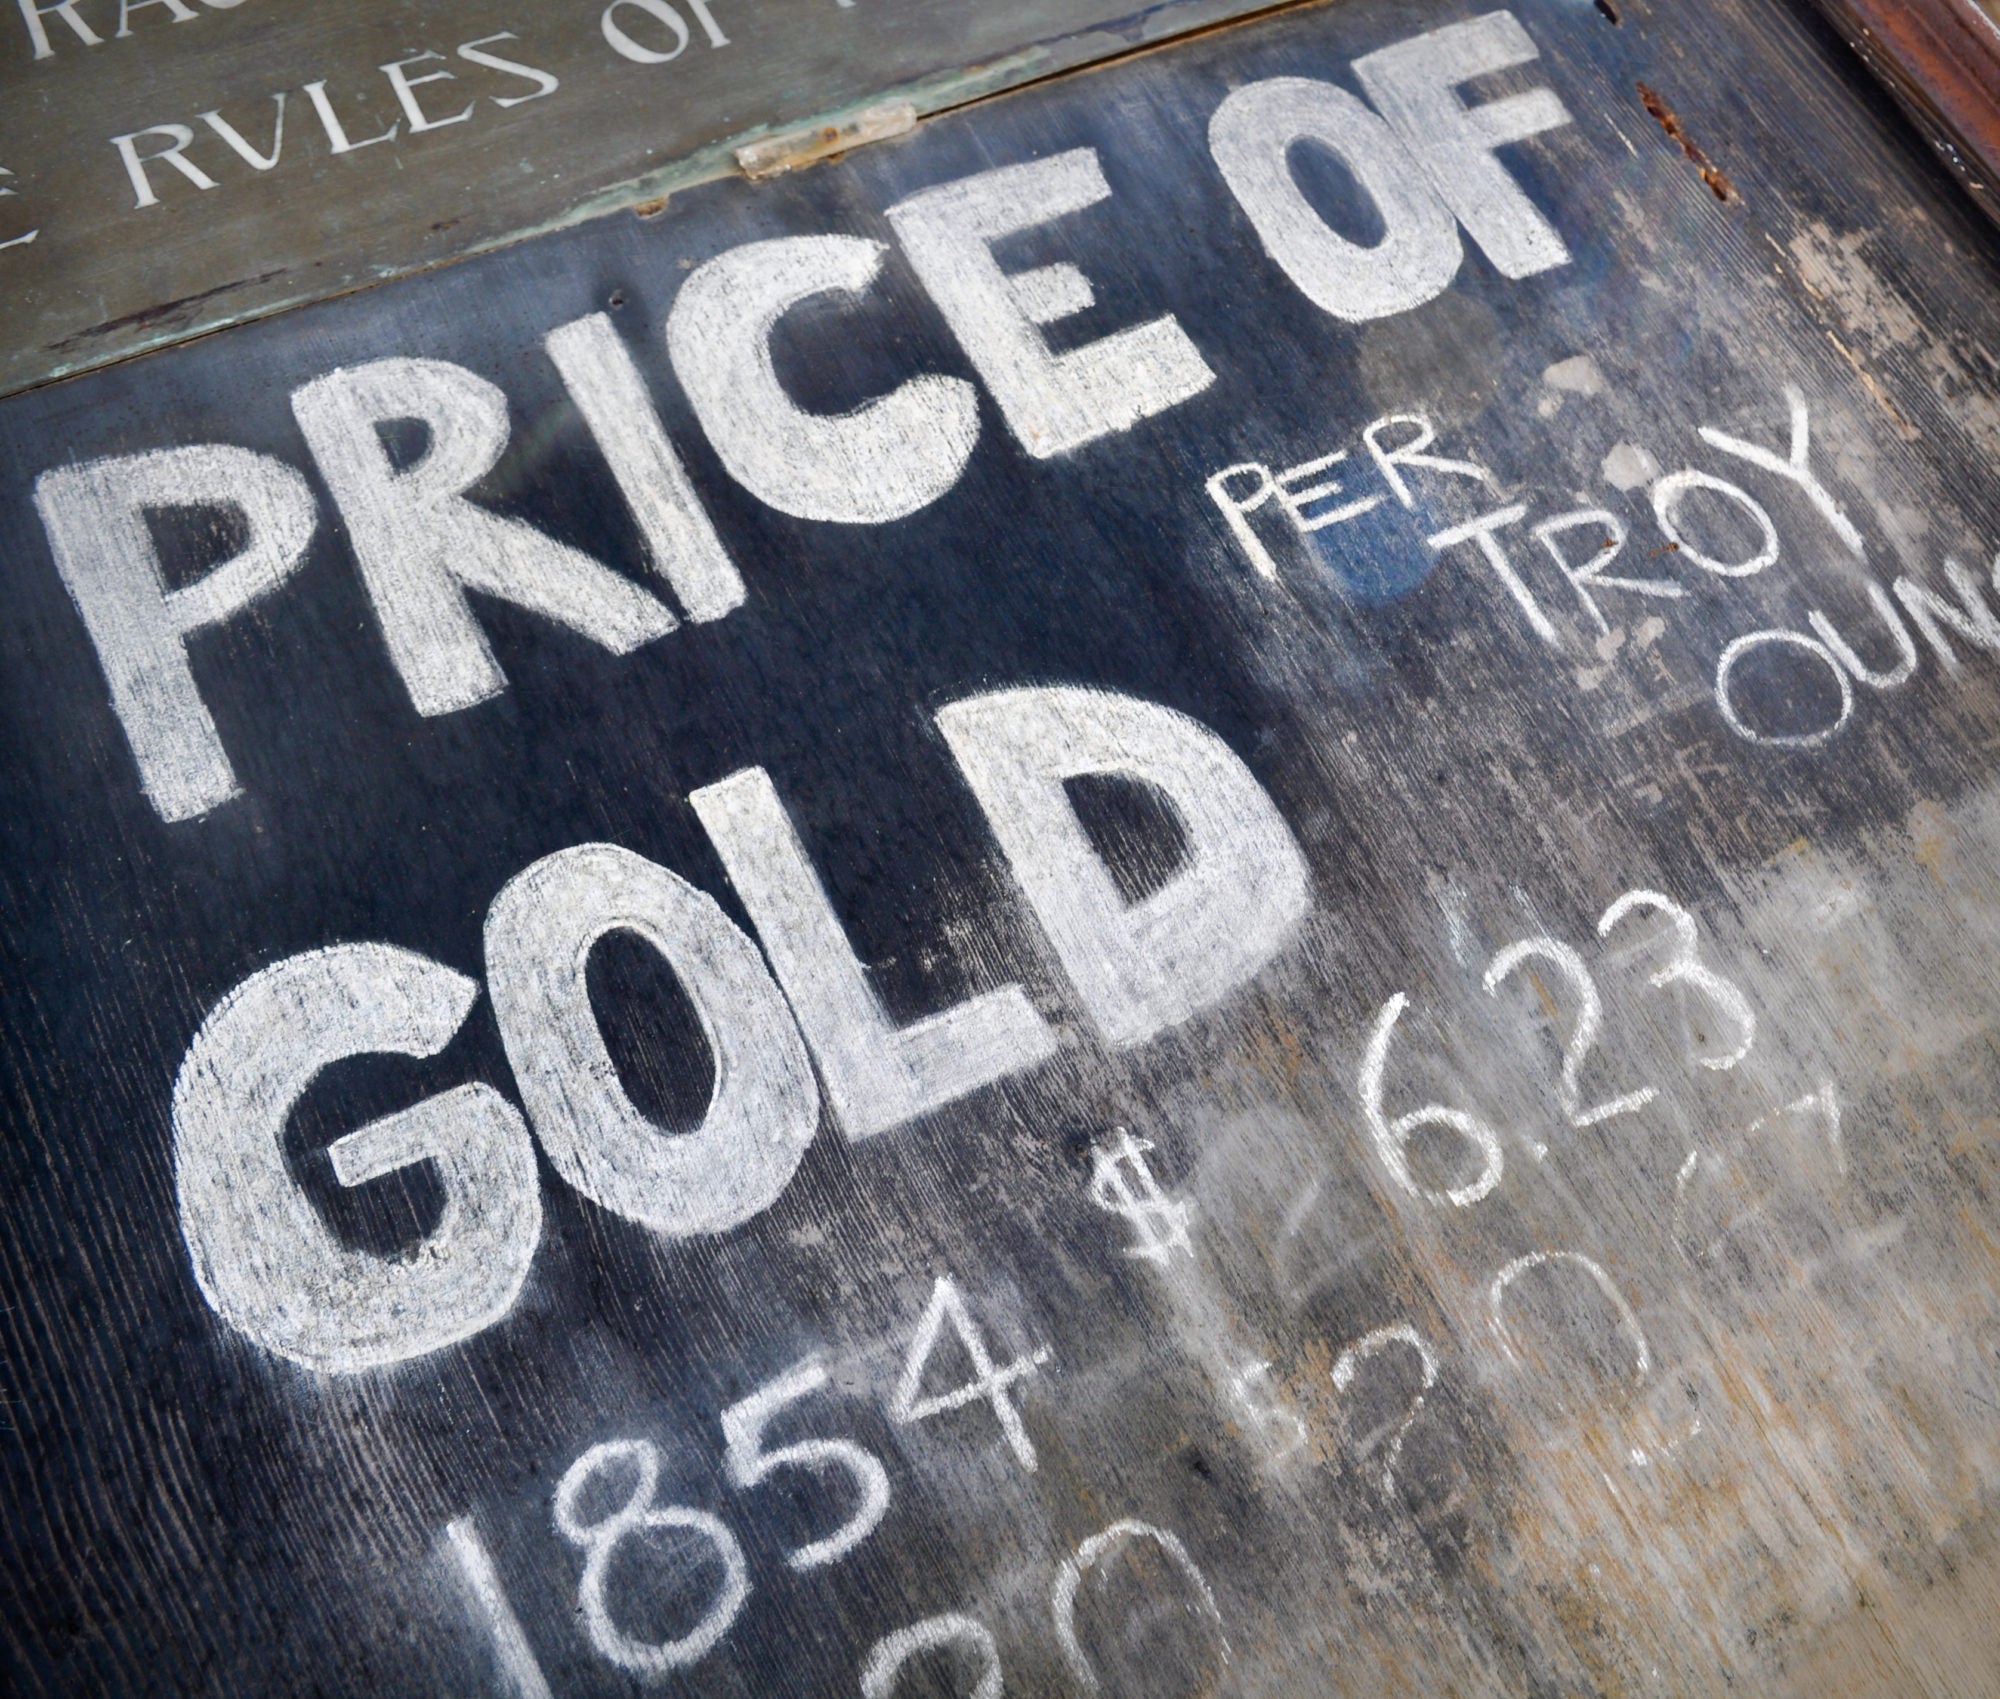 GOLD PREDICTIONS: WHAT WILL THE PRICE BE OVER THE NEXT 5 YEARS?